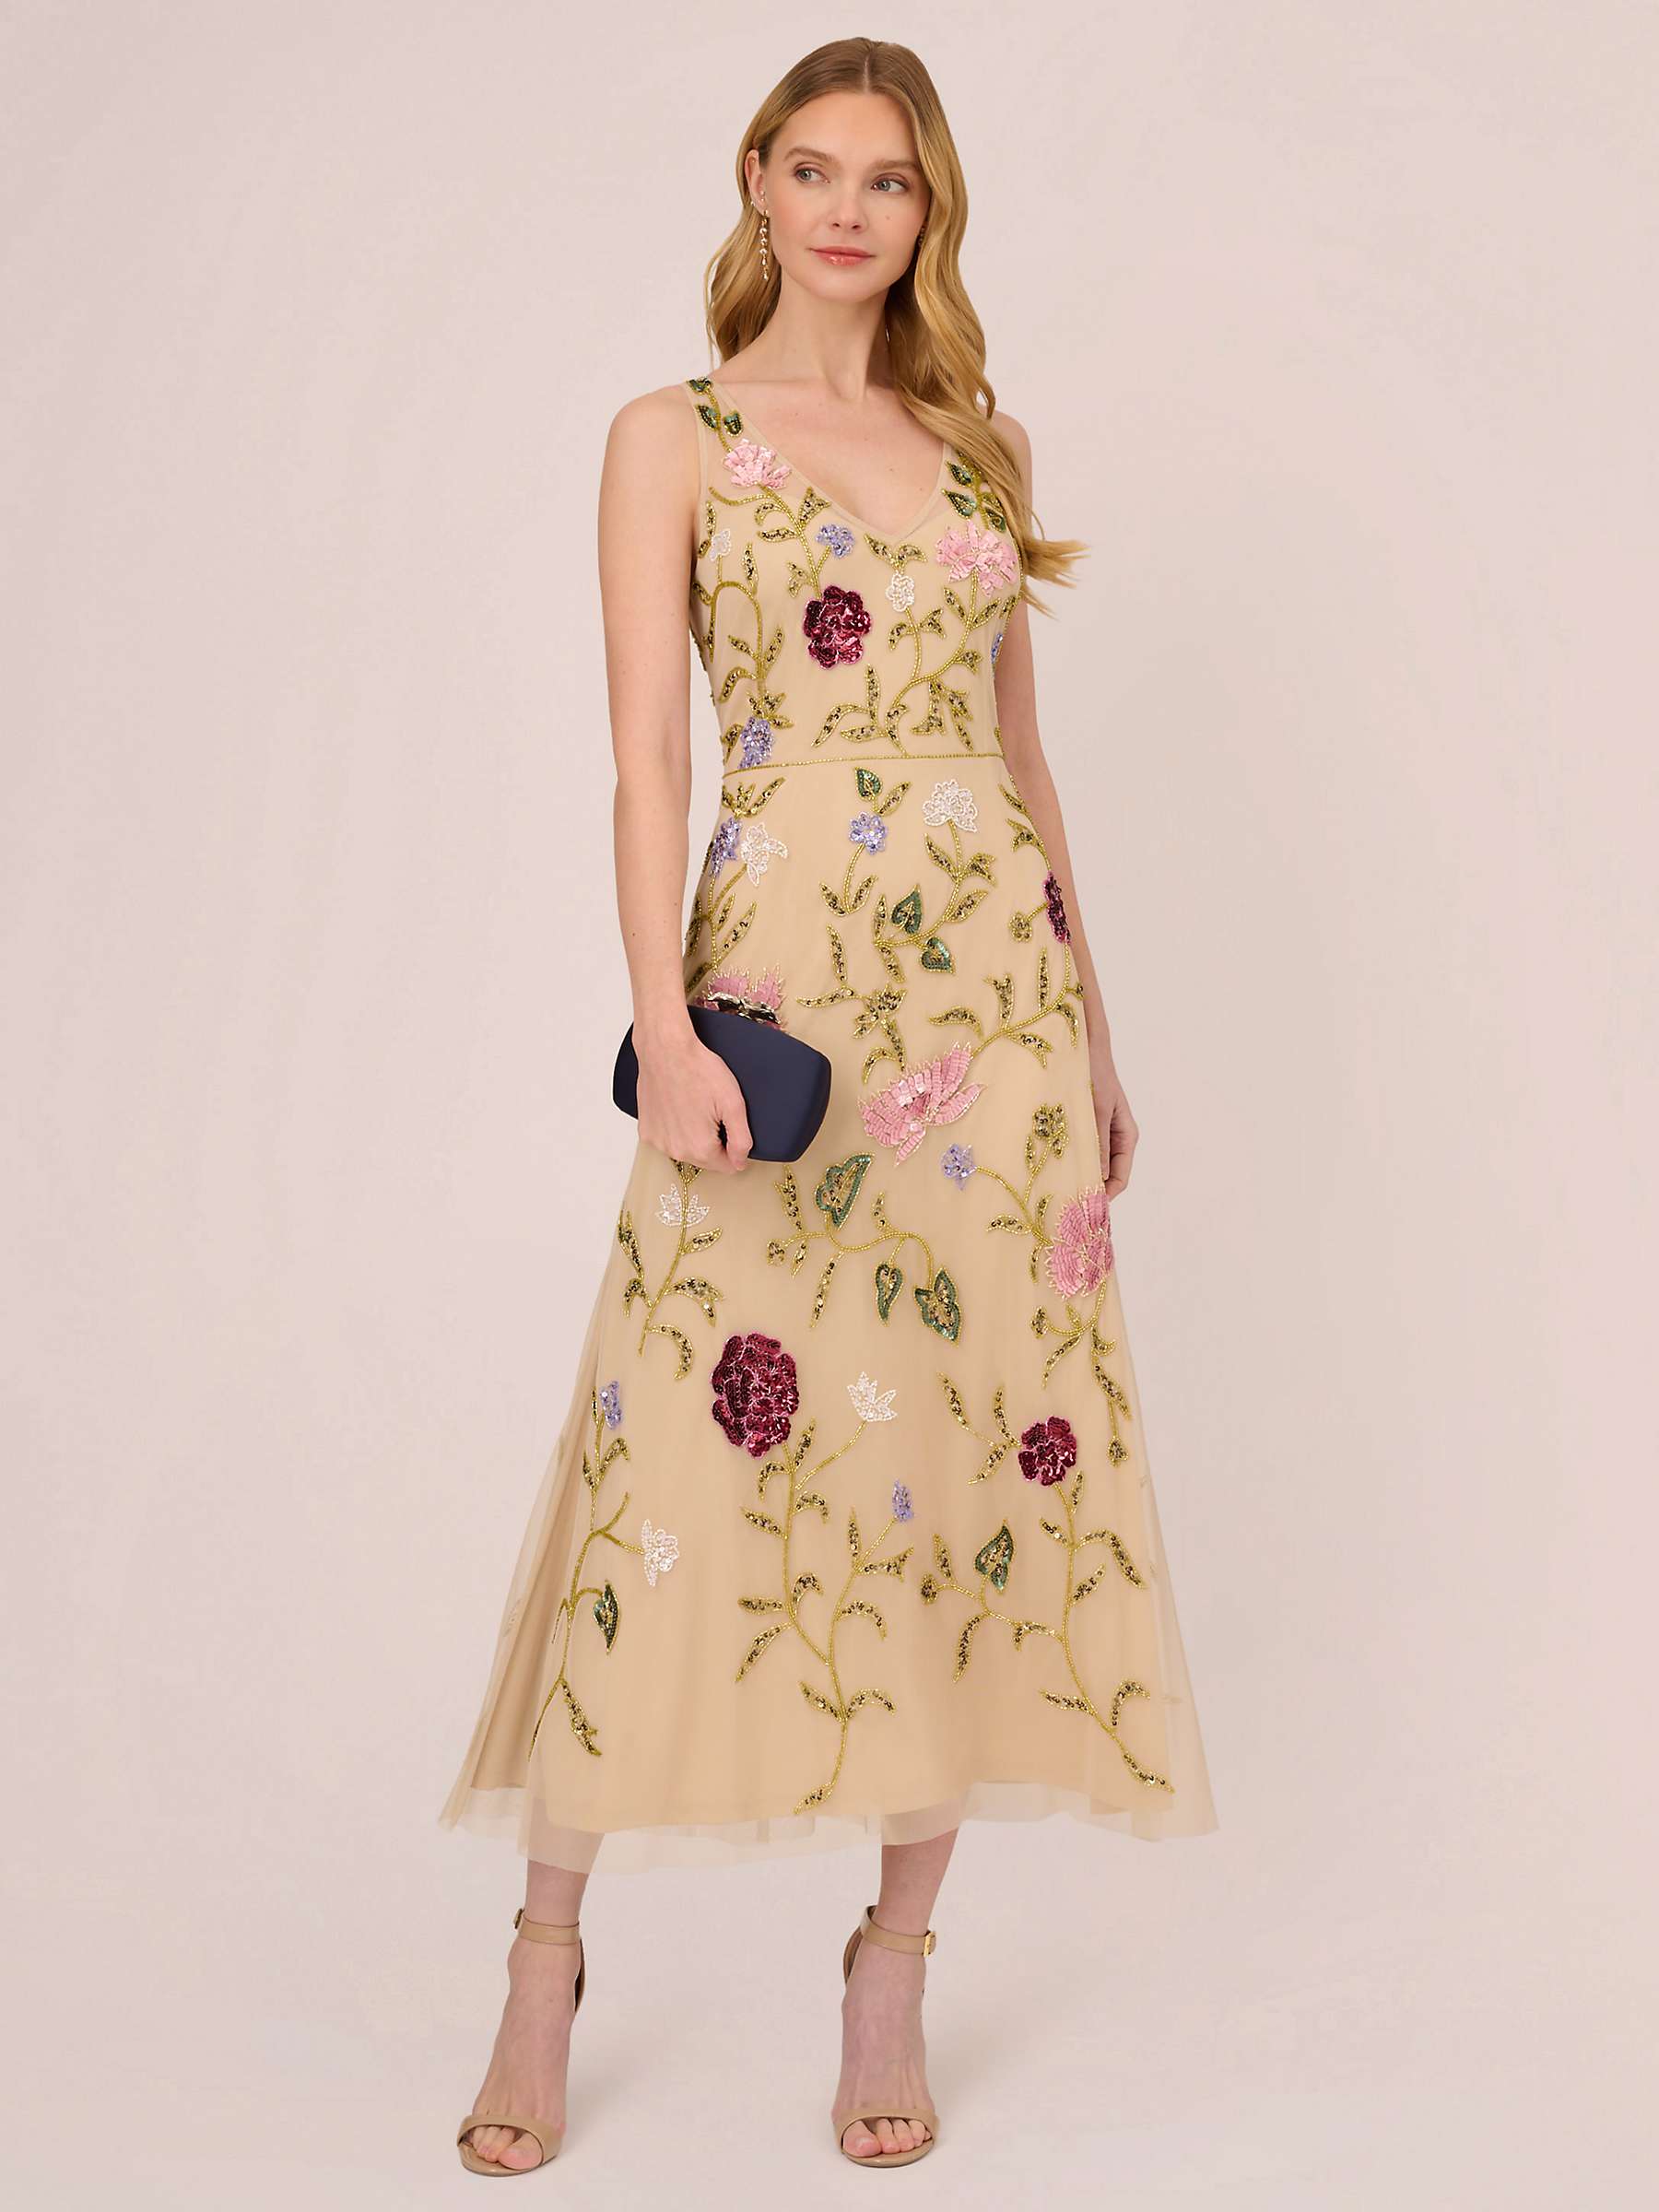 Buy Adrianna Papell Beaded Ankle Length Dress, Light Champagne Online at johnlewis.com